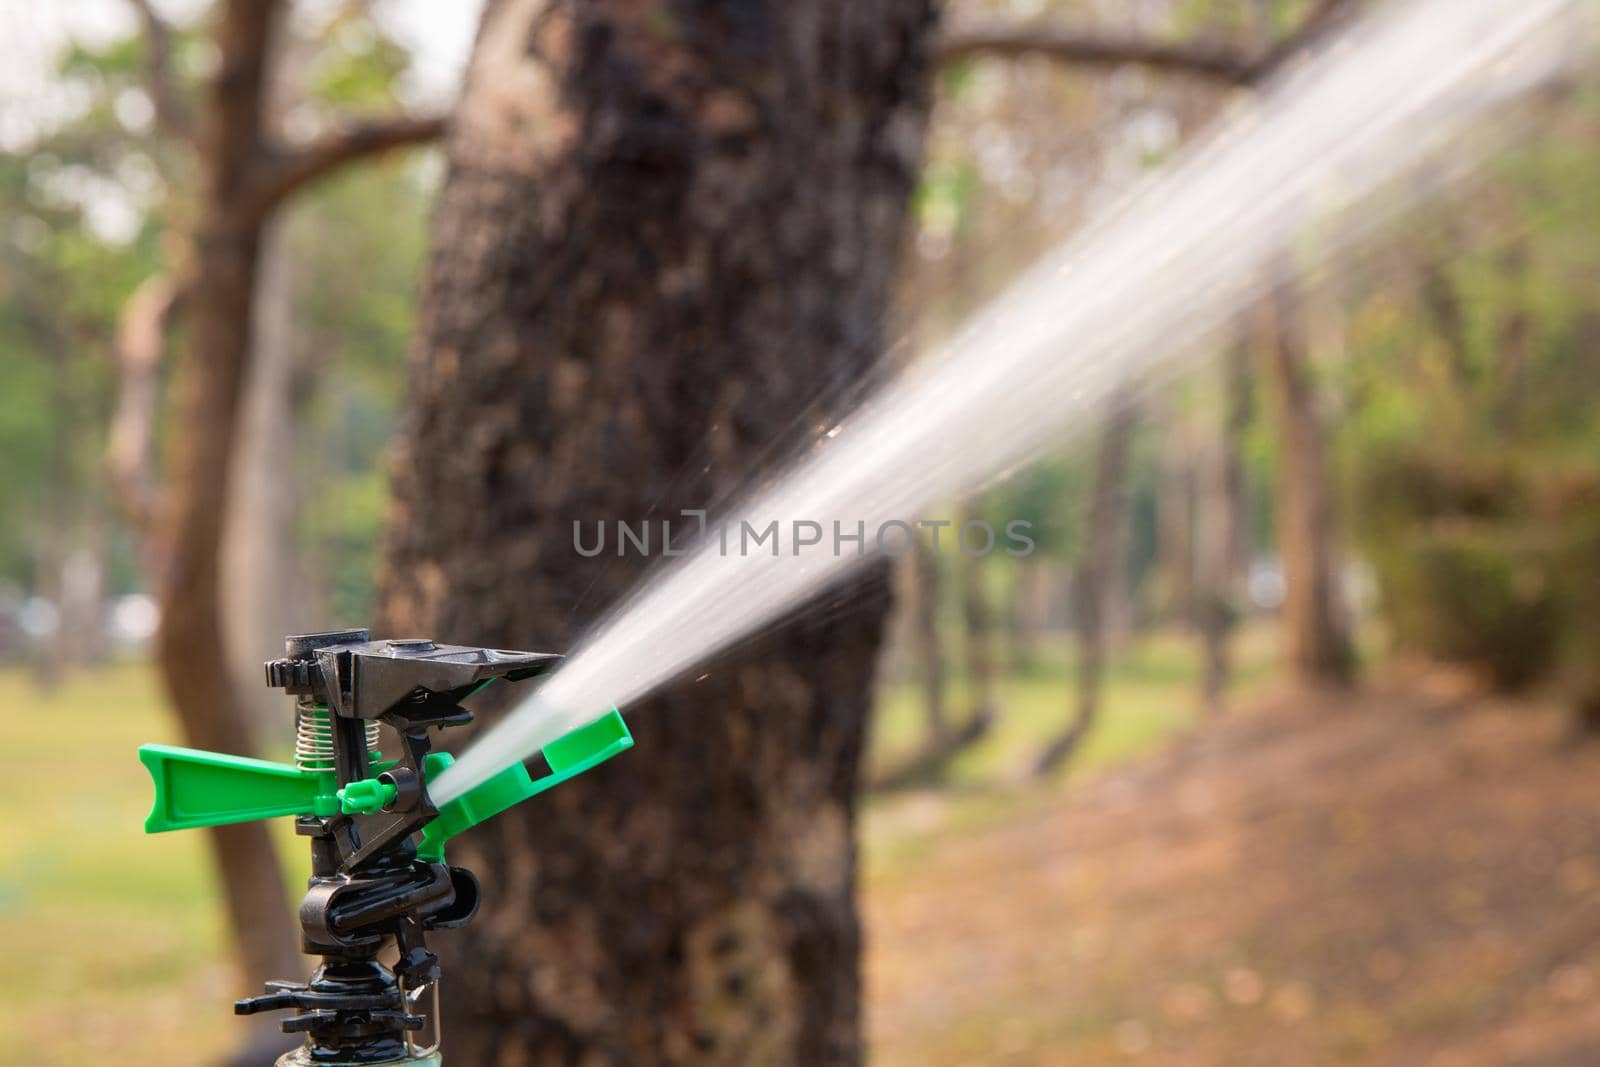 sprinkler head watering the bush and grass in backyard by toa55